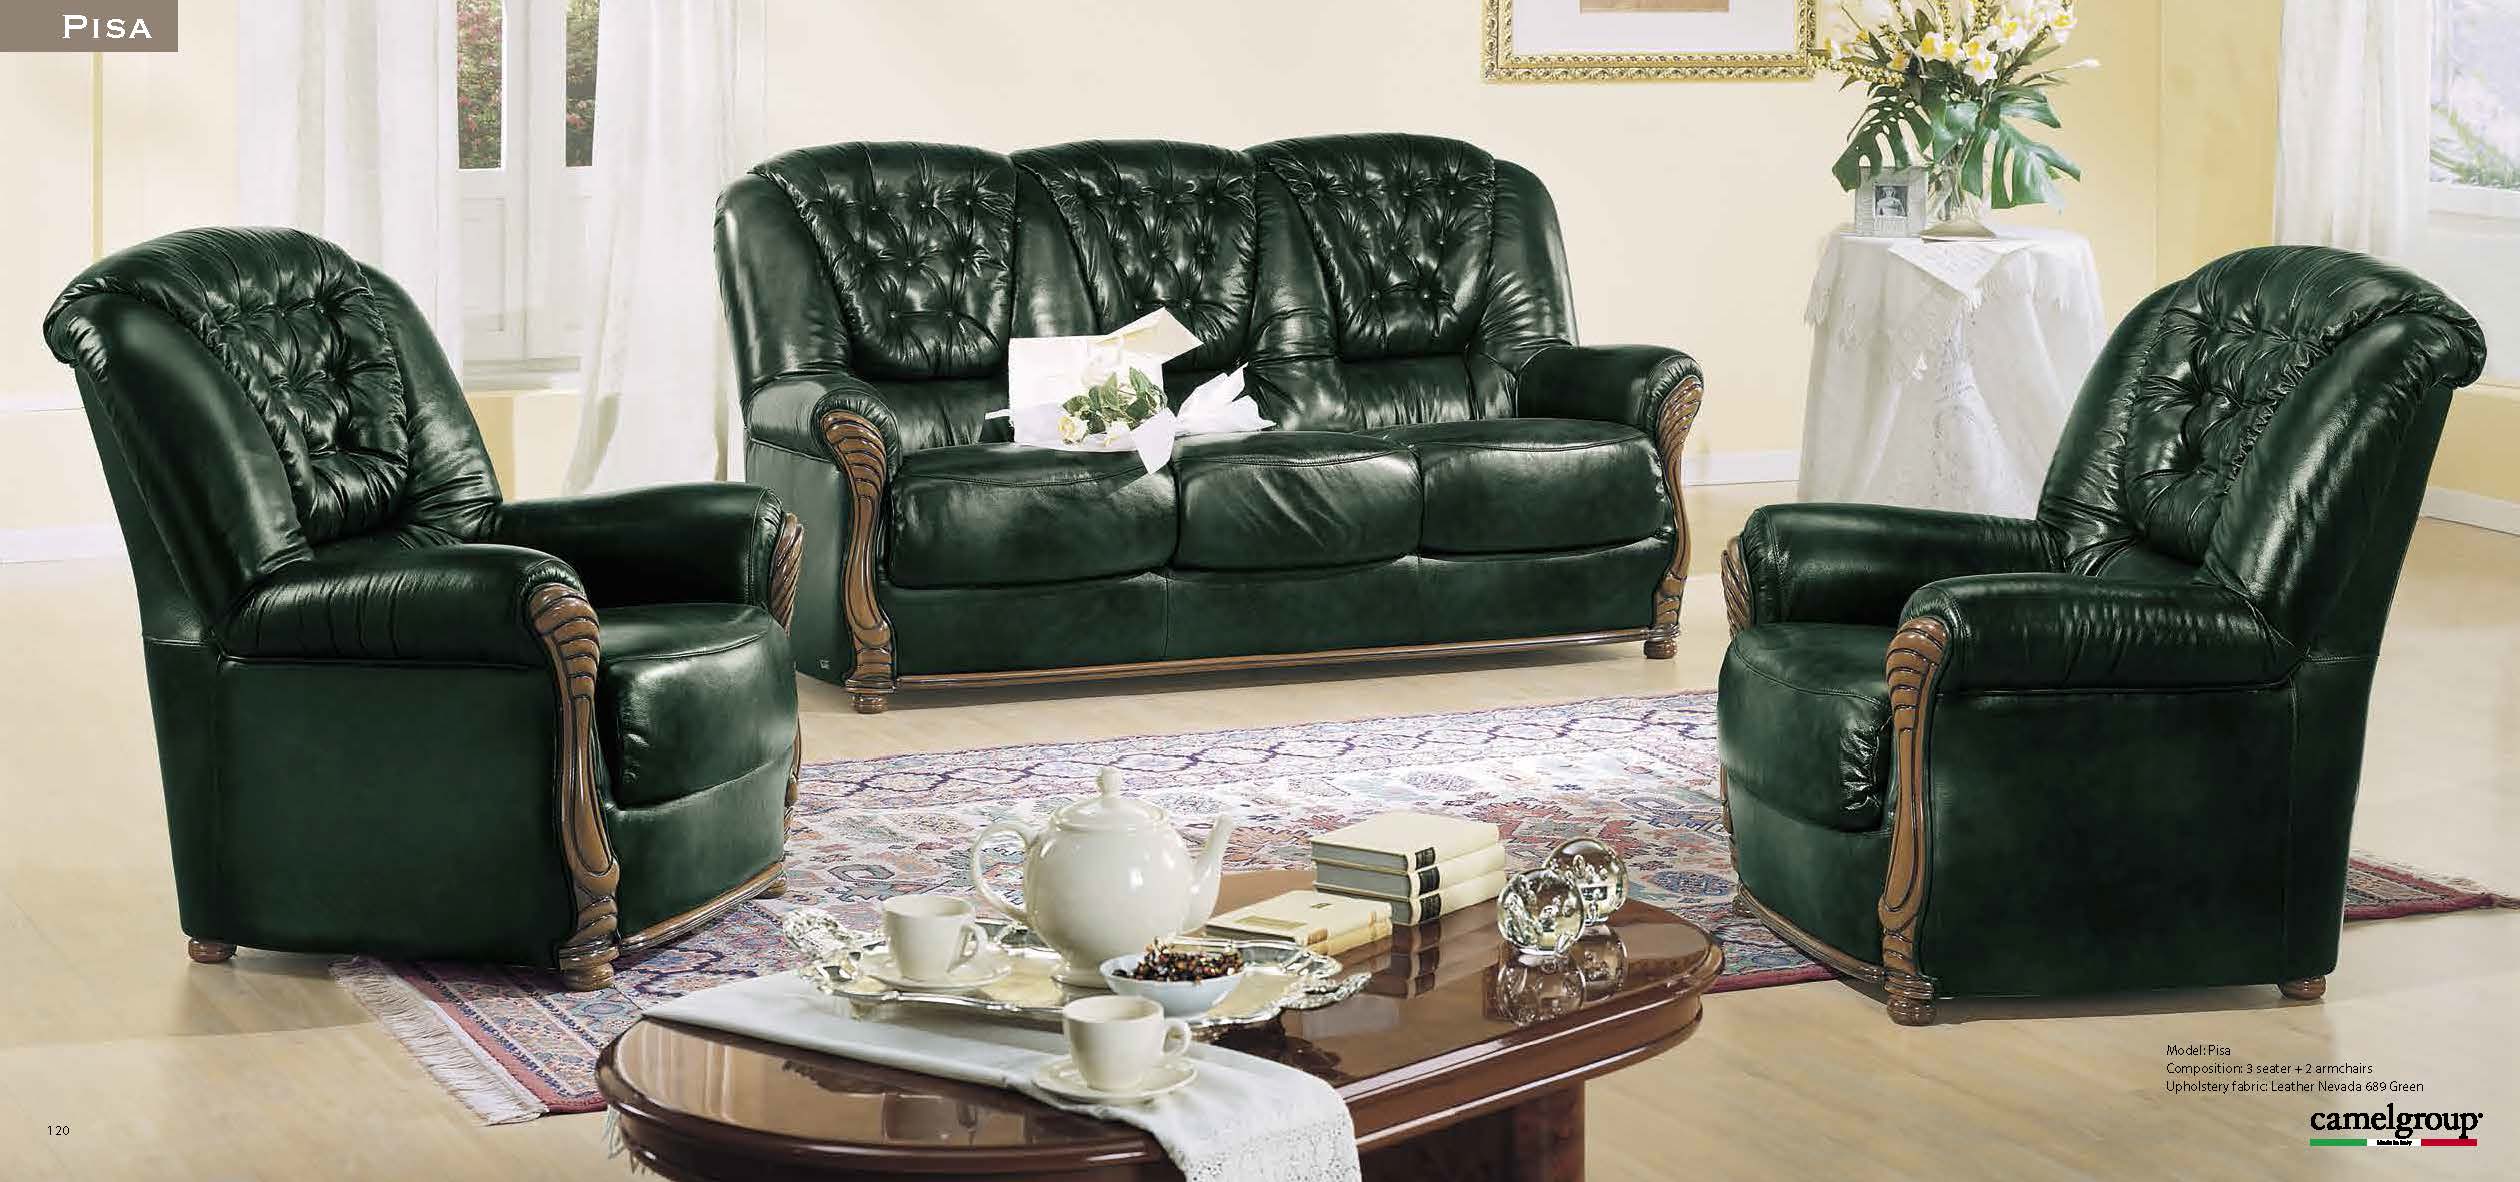 Living Room Furniture Sofas Loveseats and Chairs Pisa Living